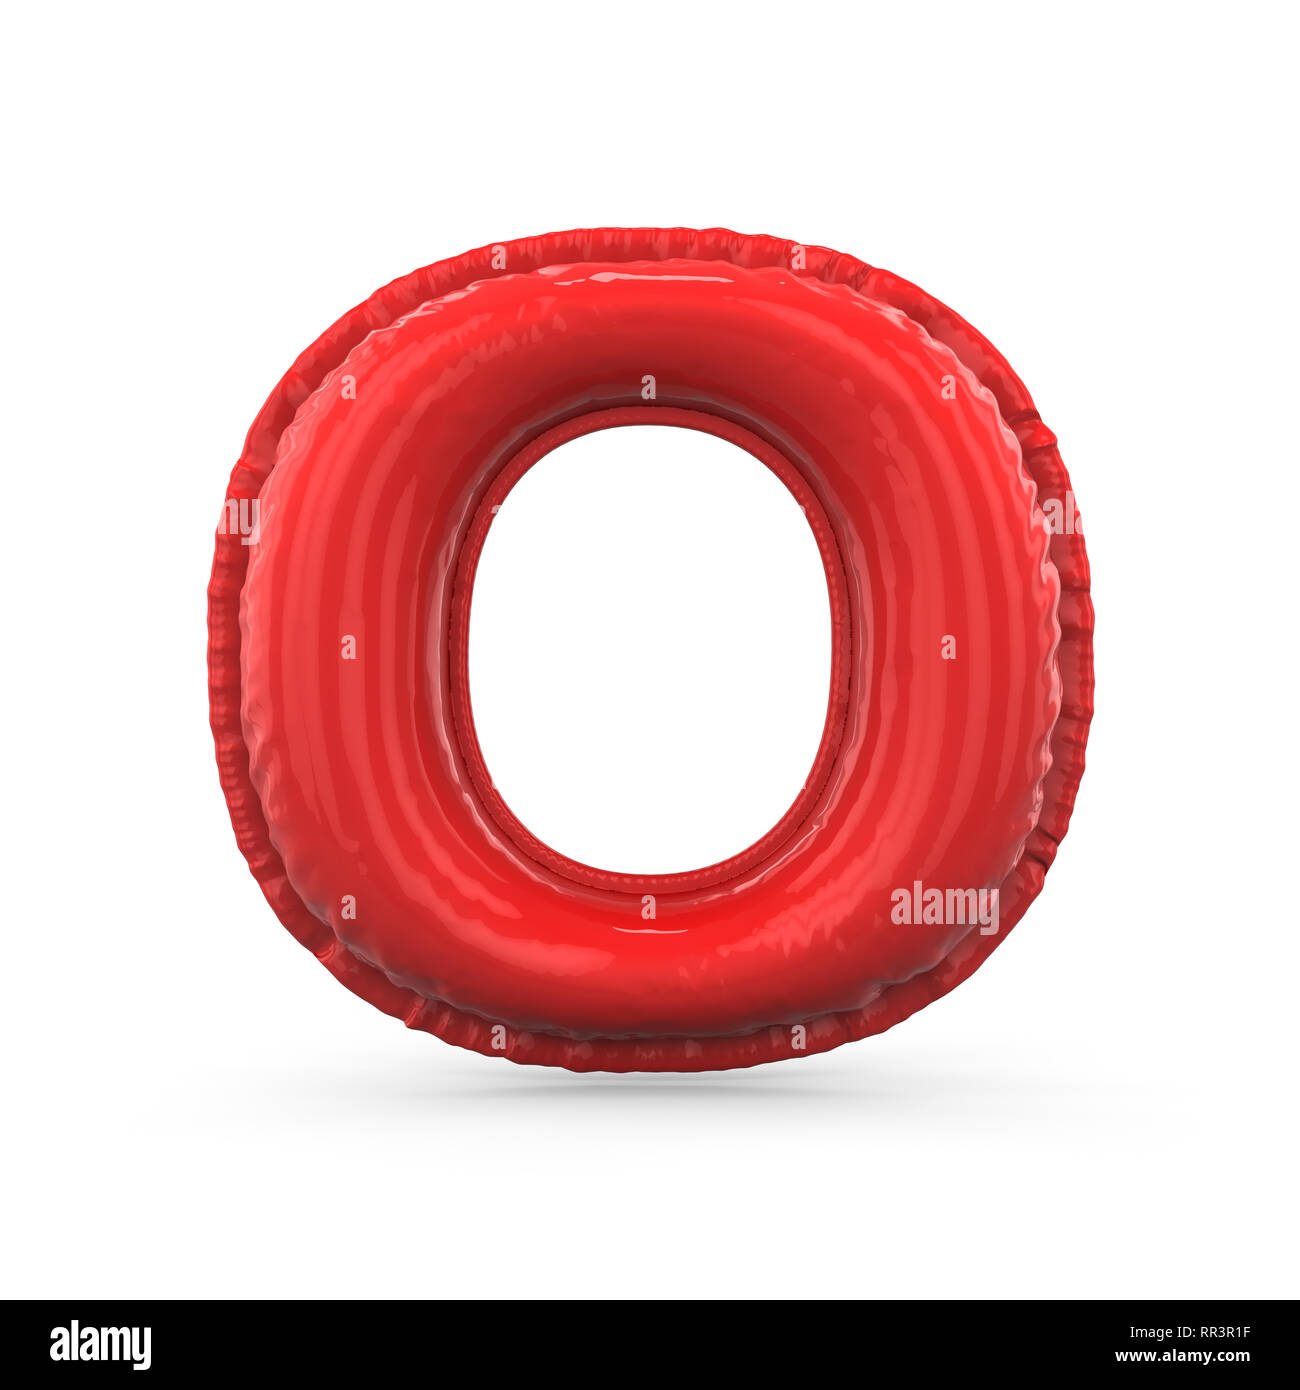 Red letter O made of inflatable balloon isolated on white background. 3D rendering Stock Photo